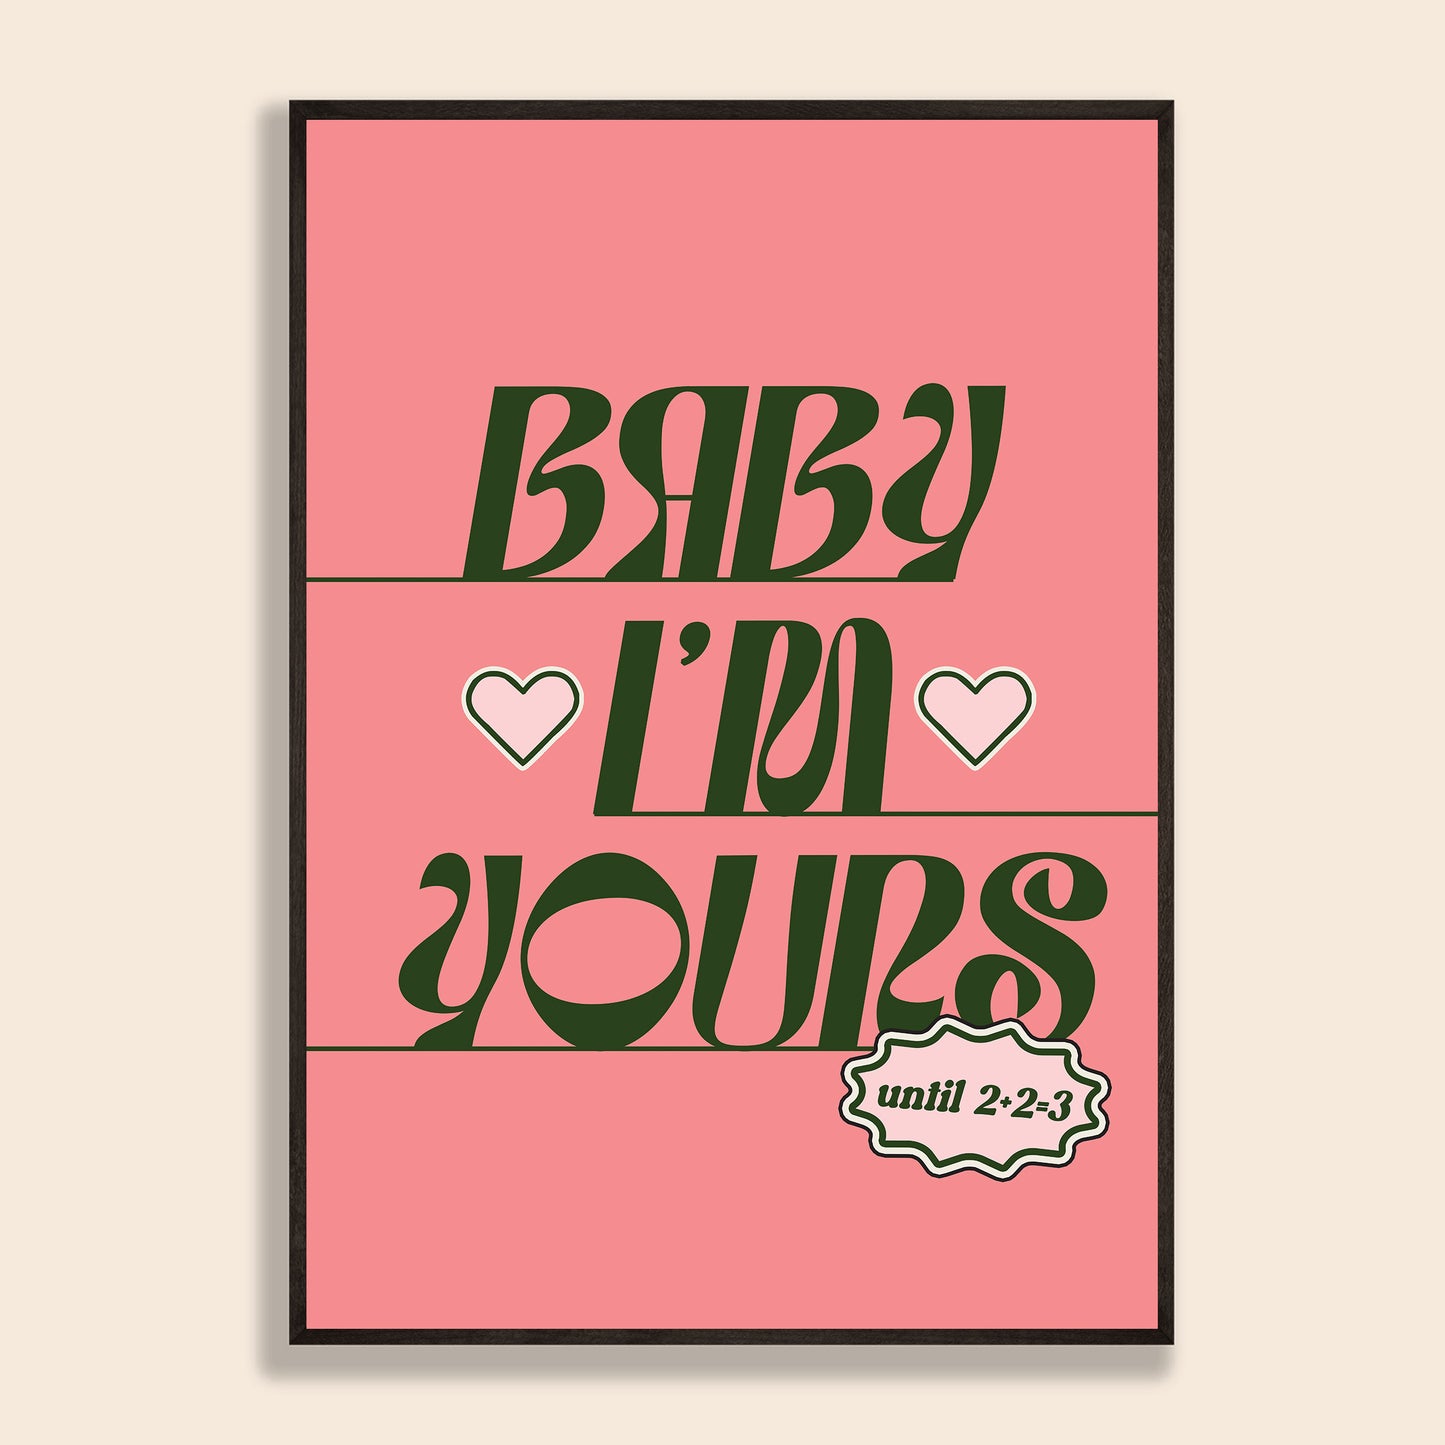 Baby I'm Yours Print